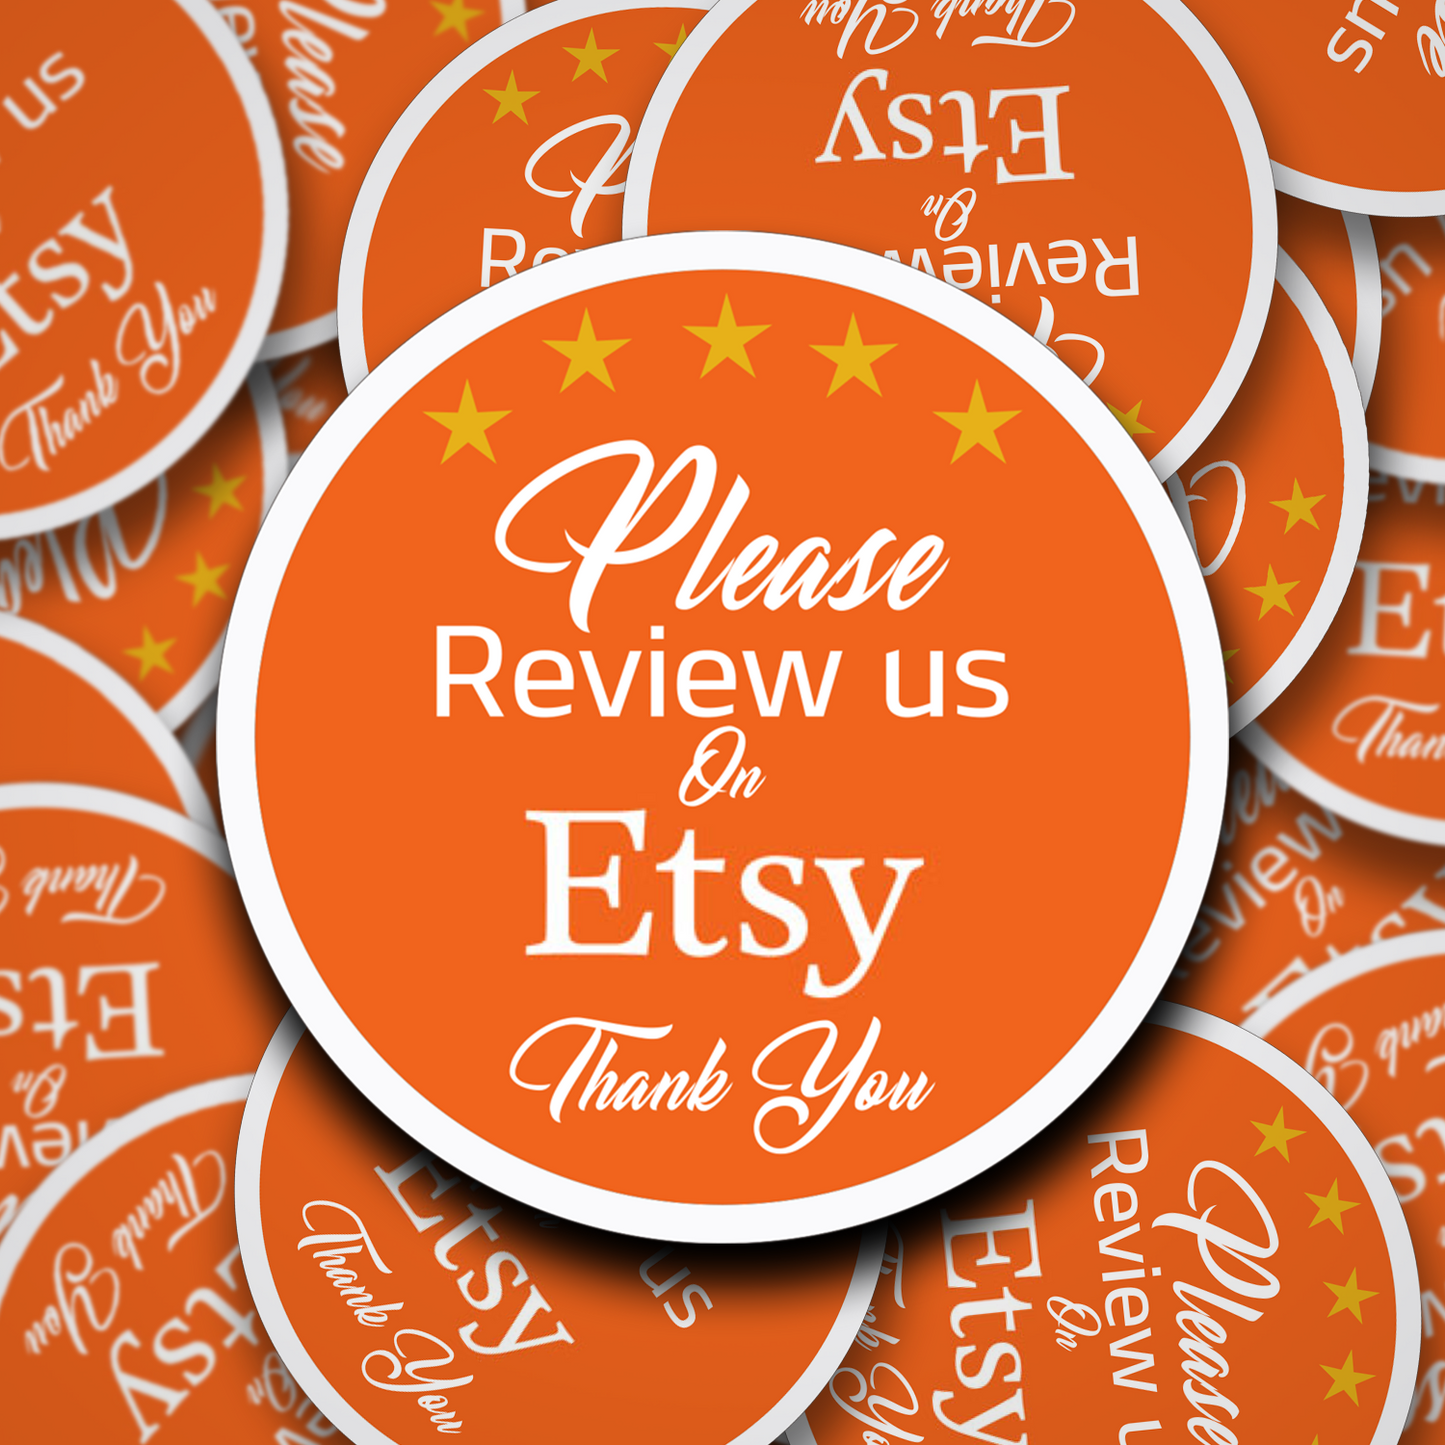 Please leave us a review on Etsy stickers